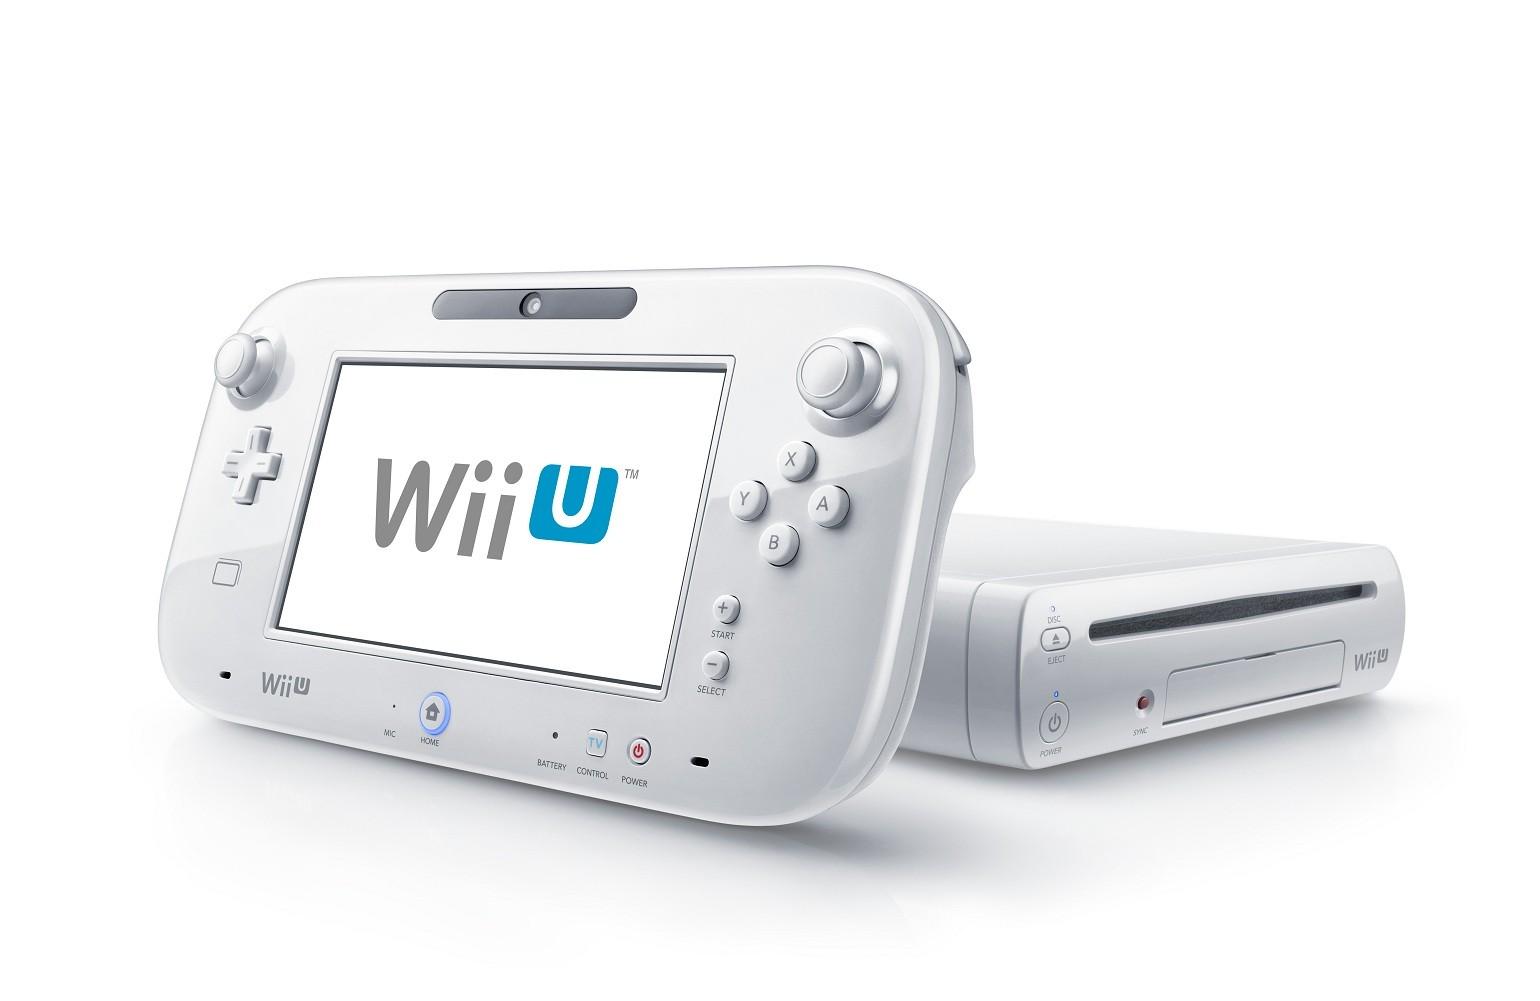 Amazon UK is Latest to Deliver Price Drop on Nintendo Wii U – Now Under £200